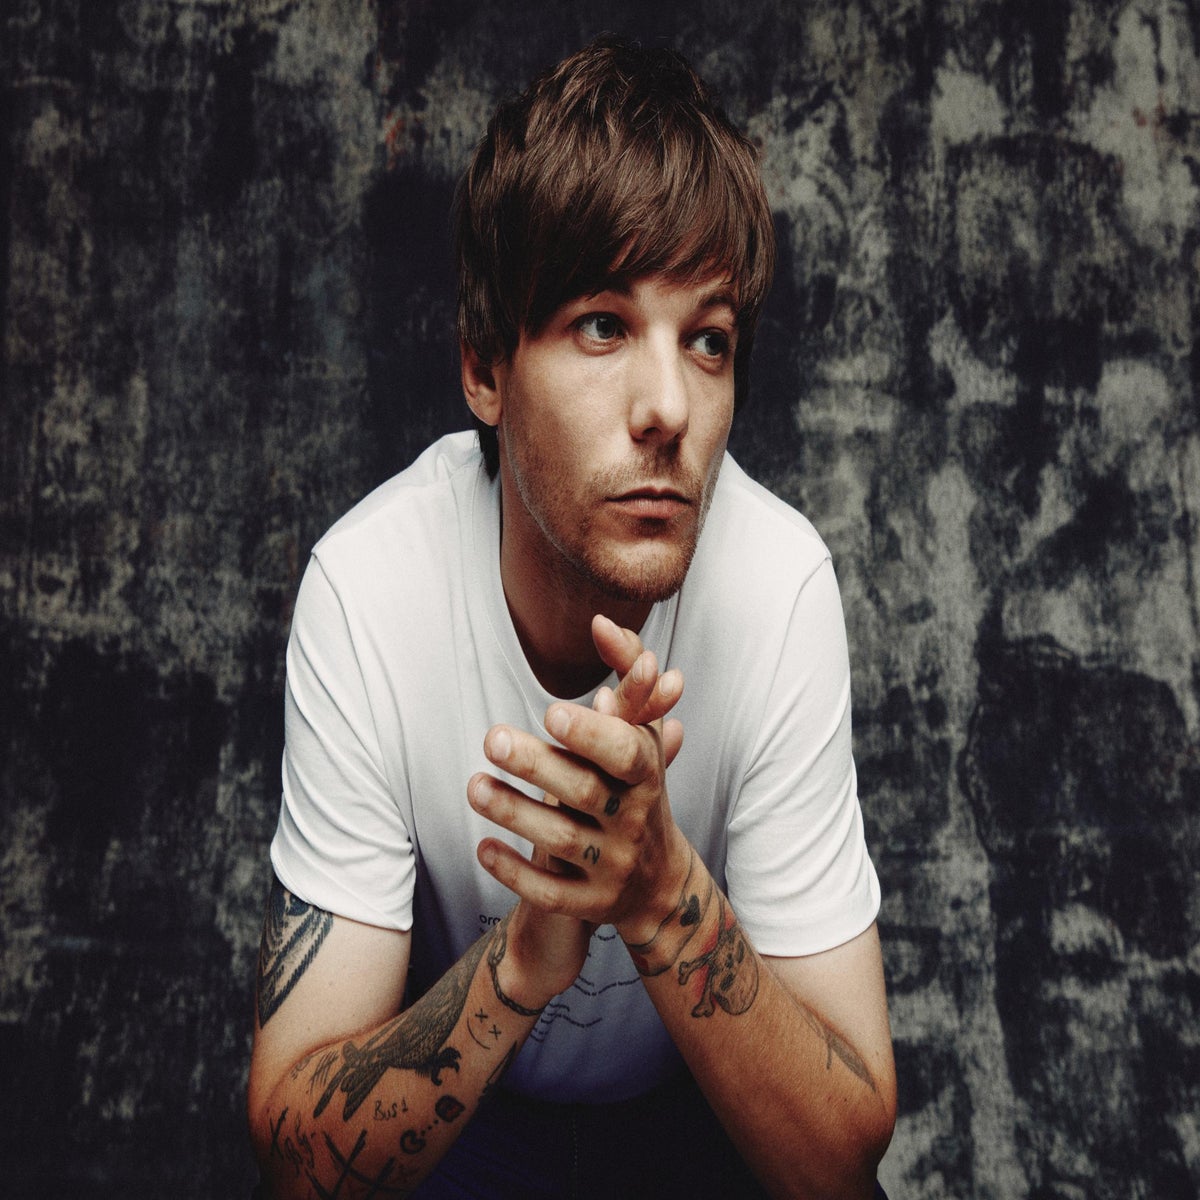 To celebrate one year since our Louis Tomlinson cover, here's the full  photoshoot